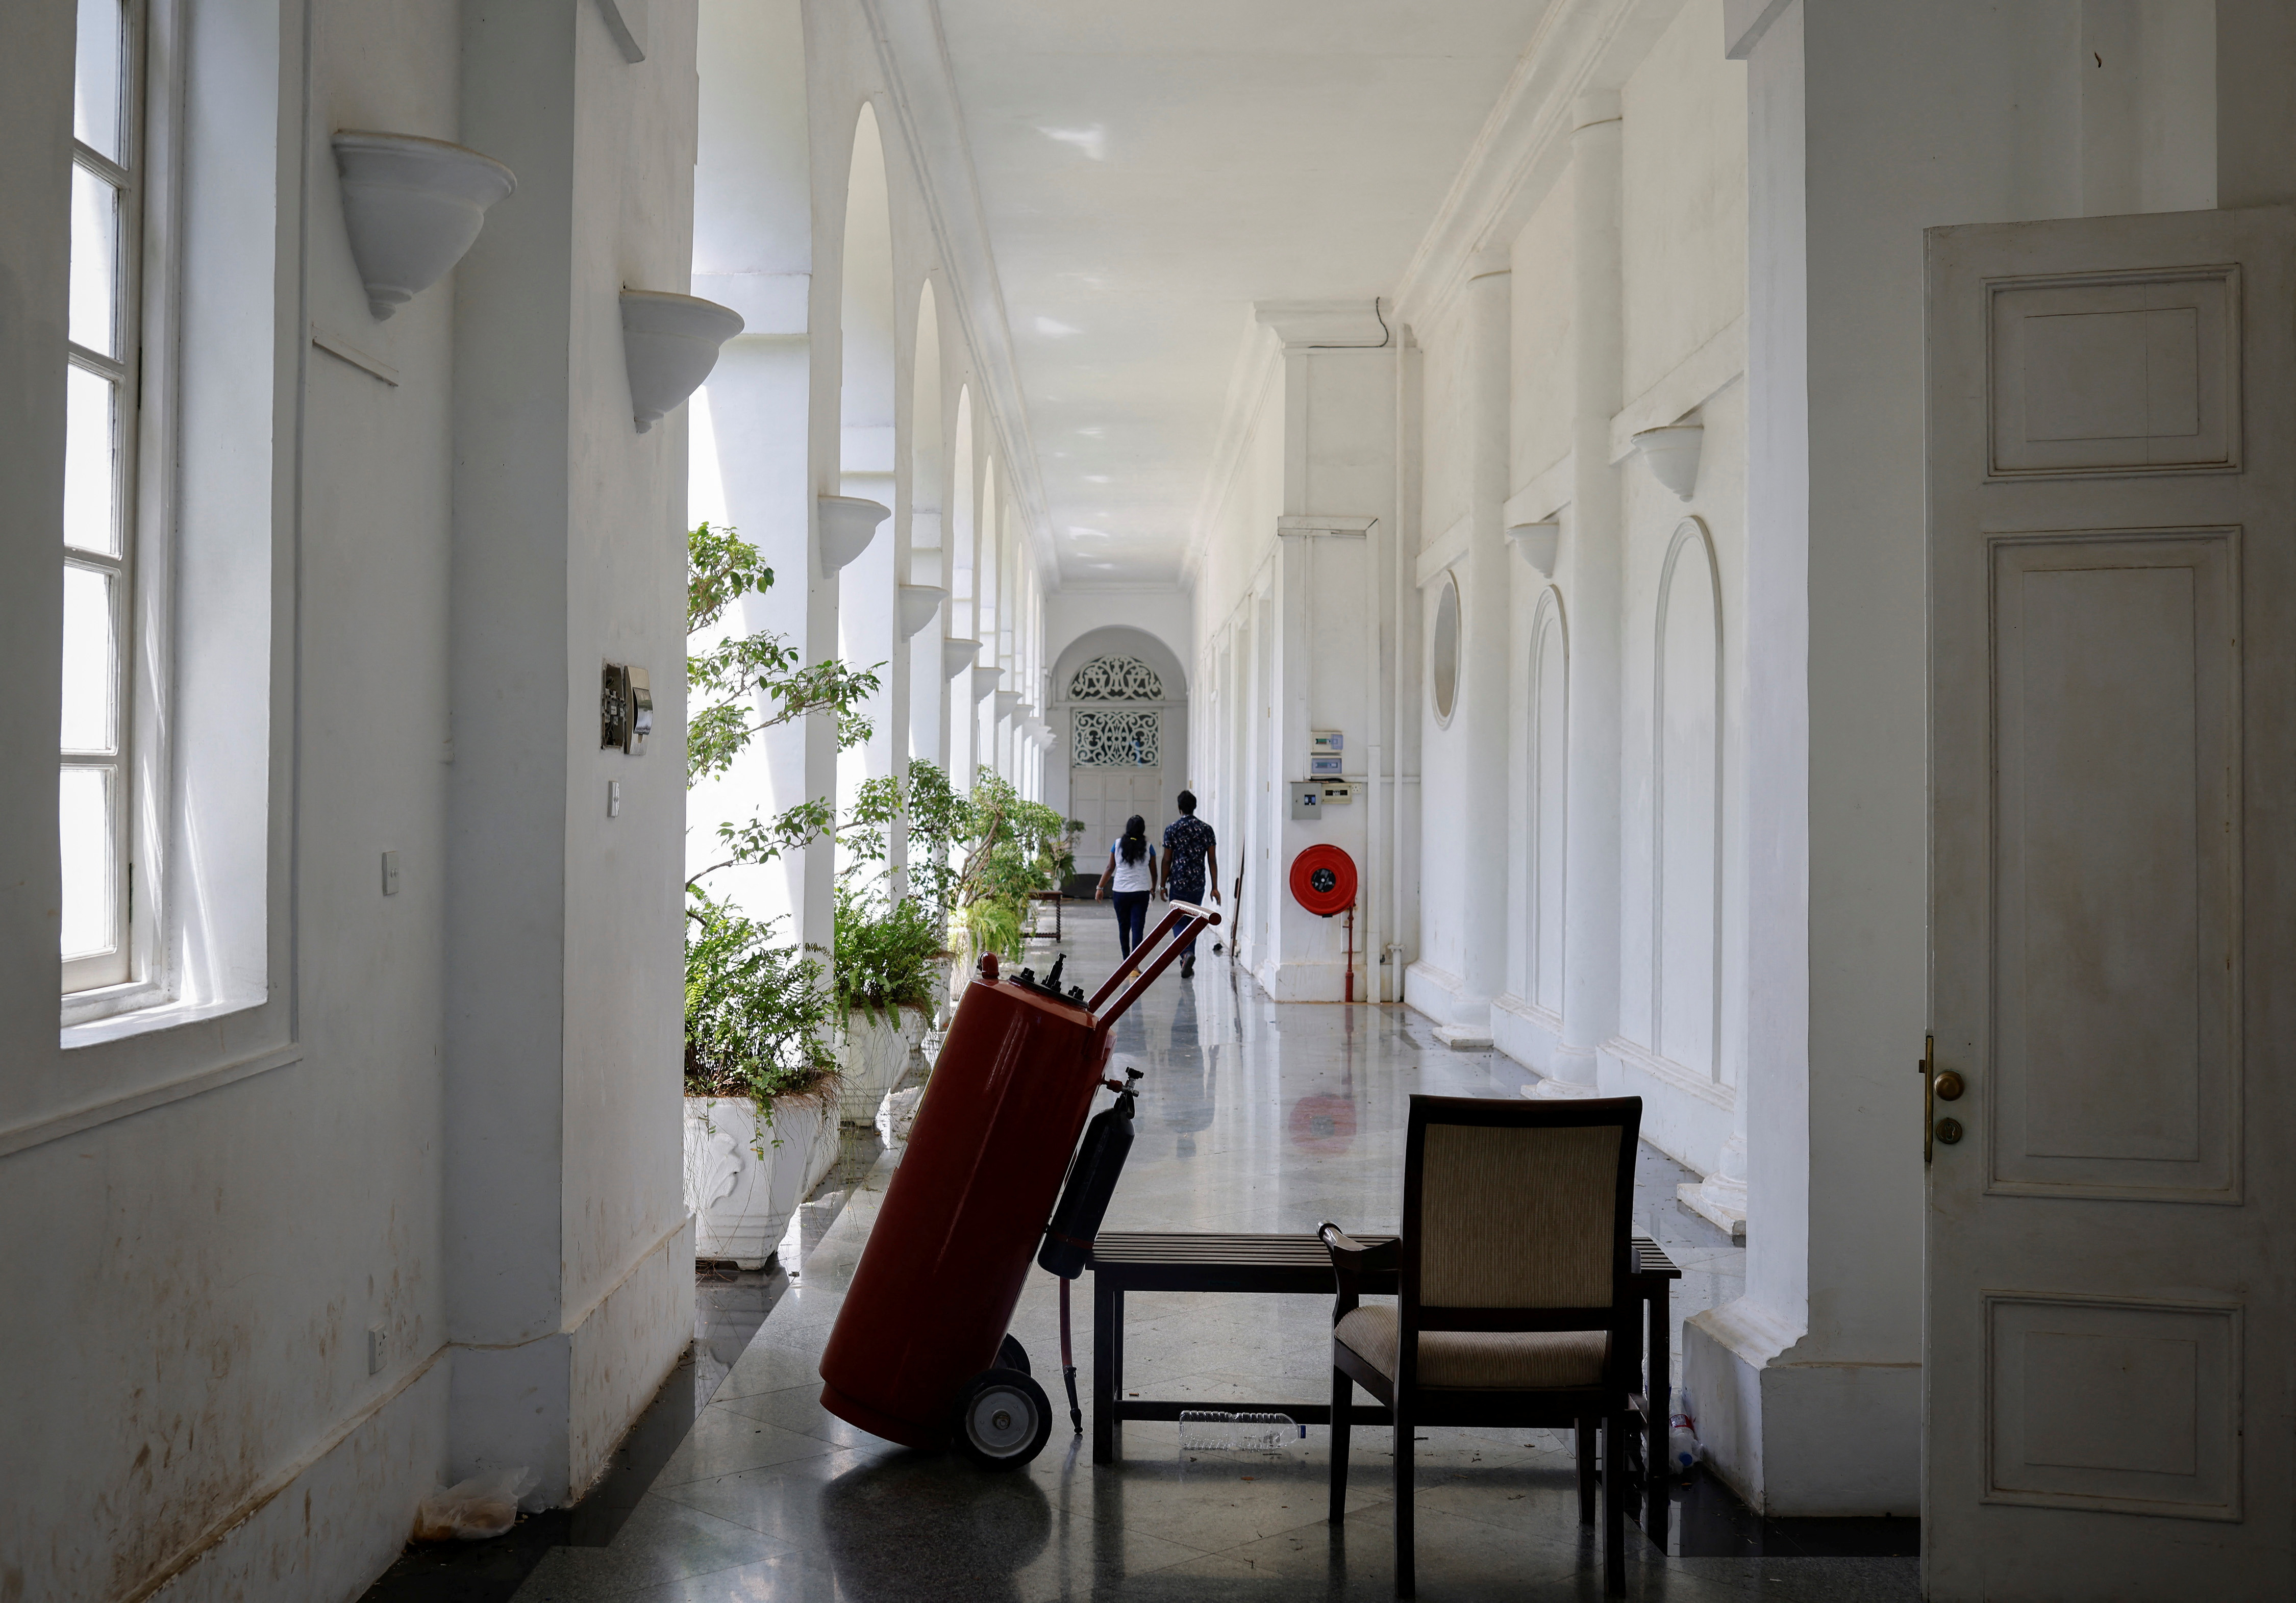 People walk as a fire extinguisher blocks a way inside the President Rajapaksa's house in Colombo